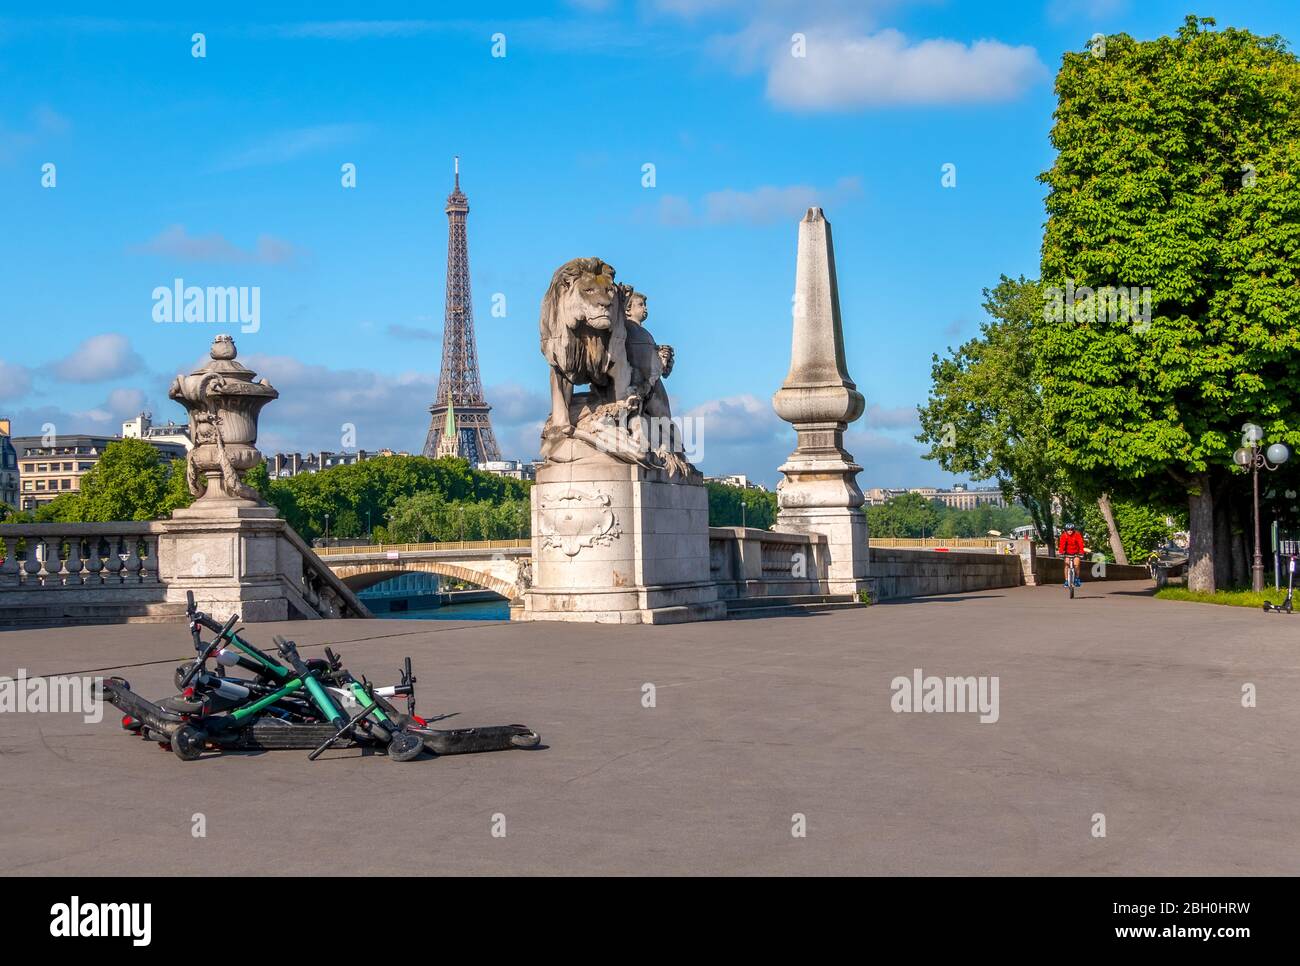 France. Summer sunny day in Paris. Seine embankment overlooking the Eiffel Tower. Heap of rental electric scooters on the pavement Stock Photo